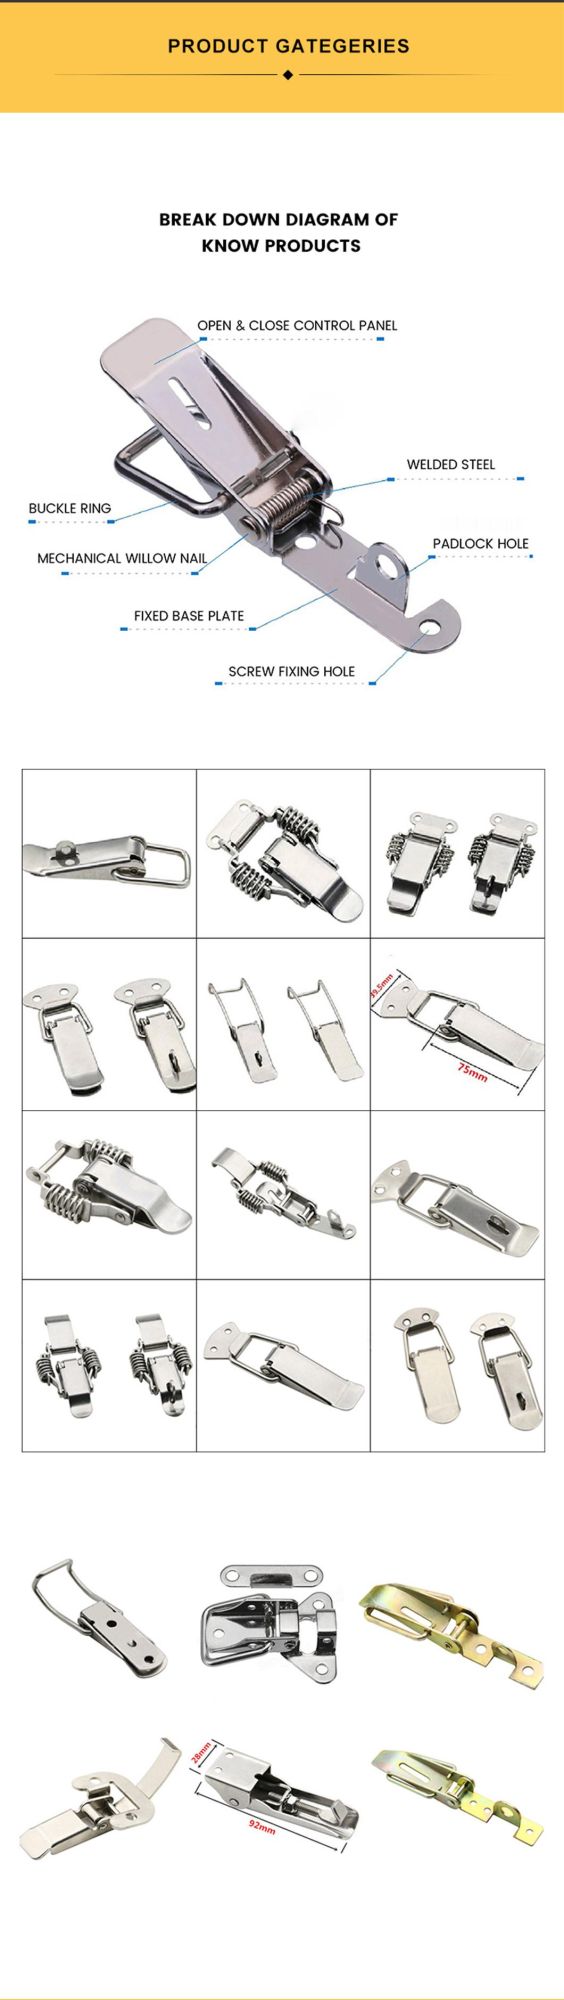 Snap Spring Lock Latch Heavy Duty Over Centre Latch Cutting Machine Parts Toggle Hook Latch